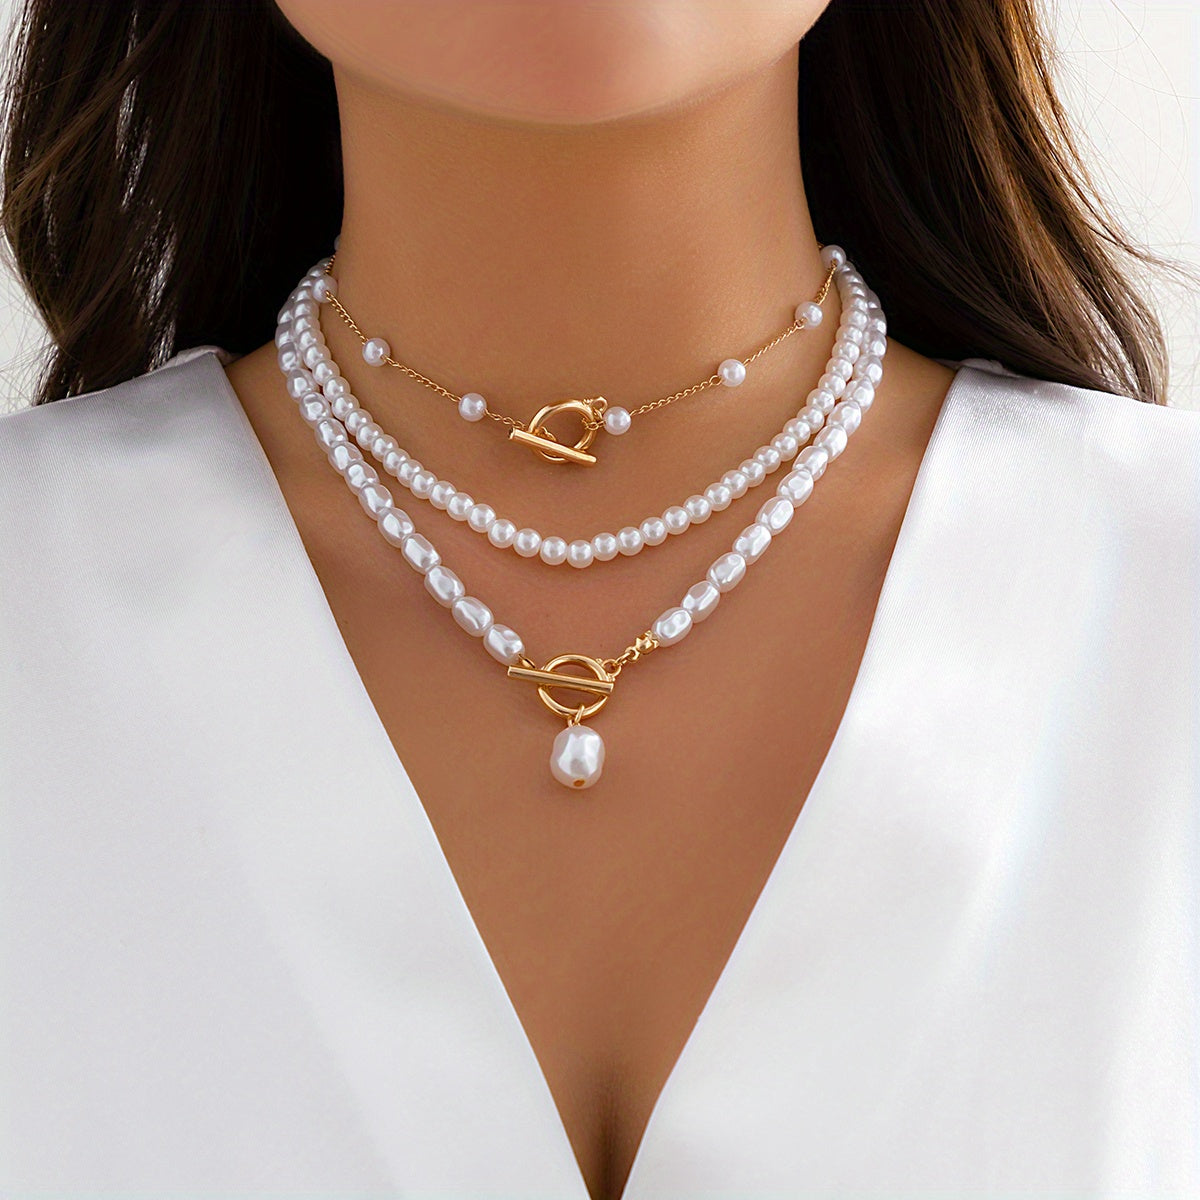 3pcs Vintage Baroque Faux Pearl Pendant Set - A Must-Have for Every Stylish Woman!